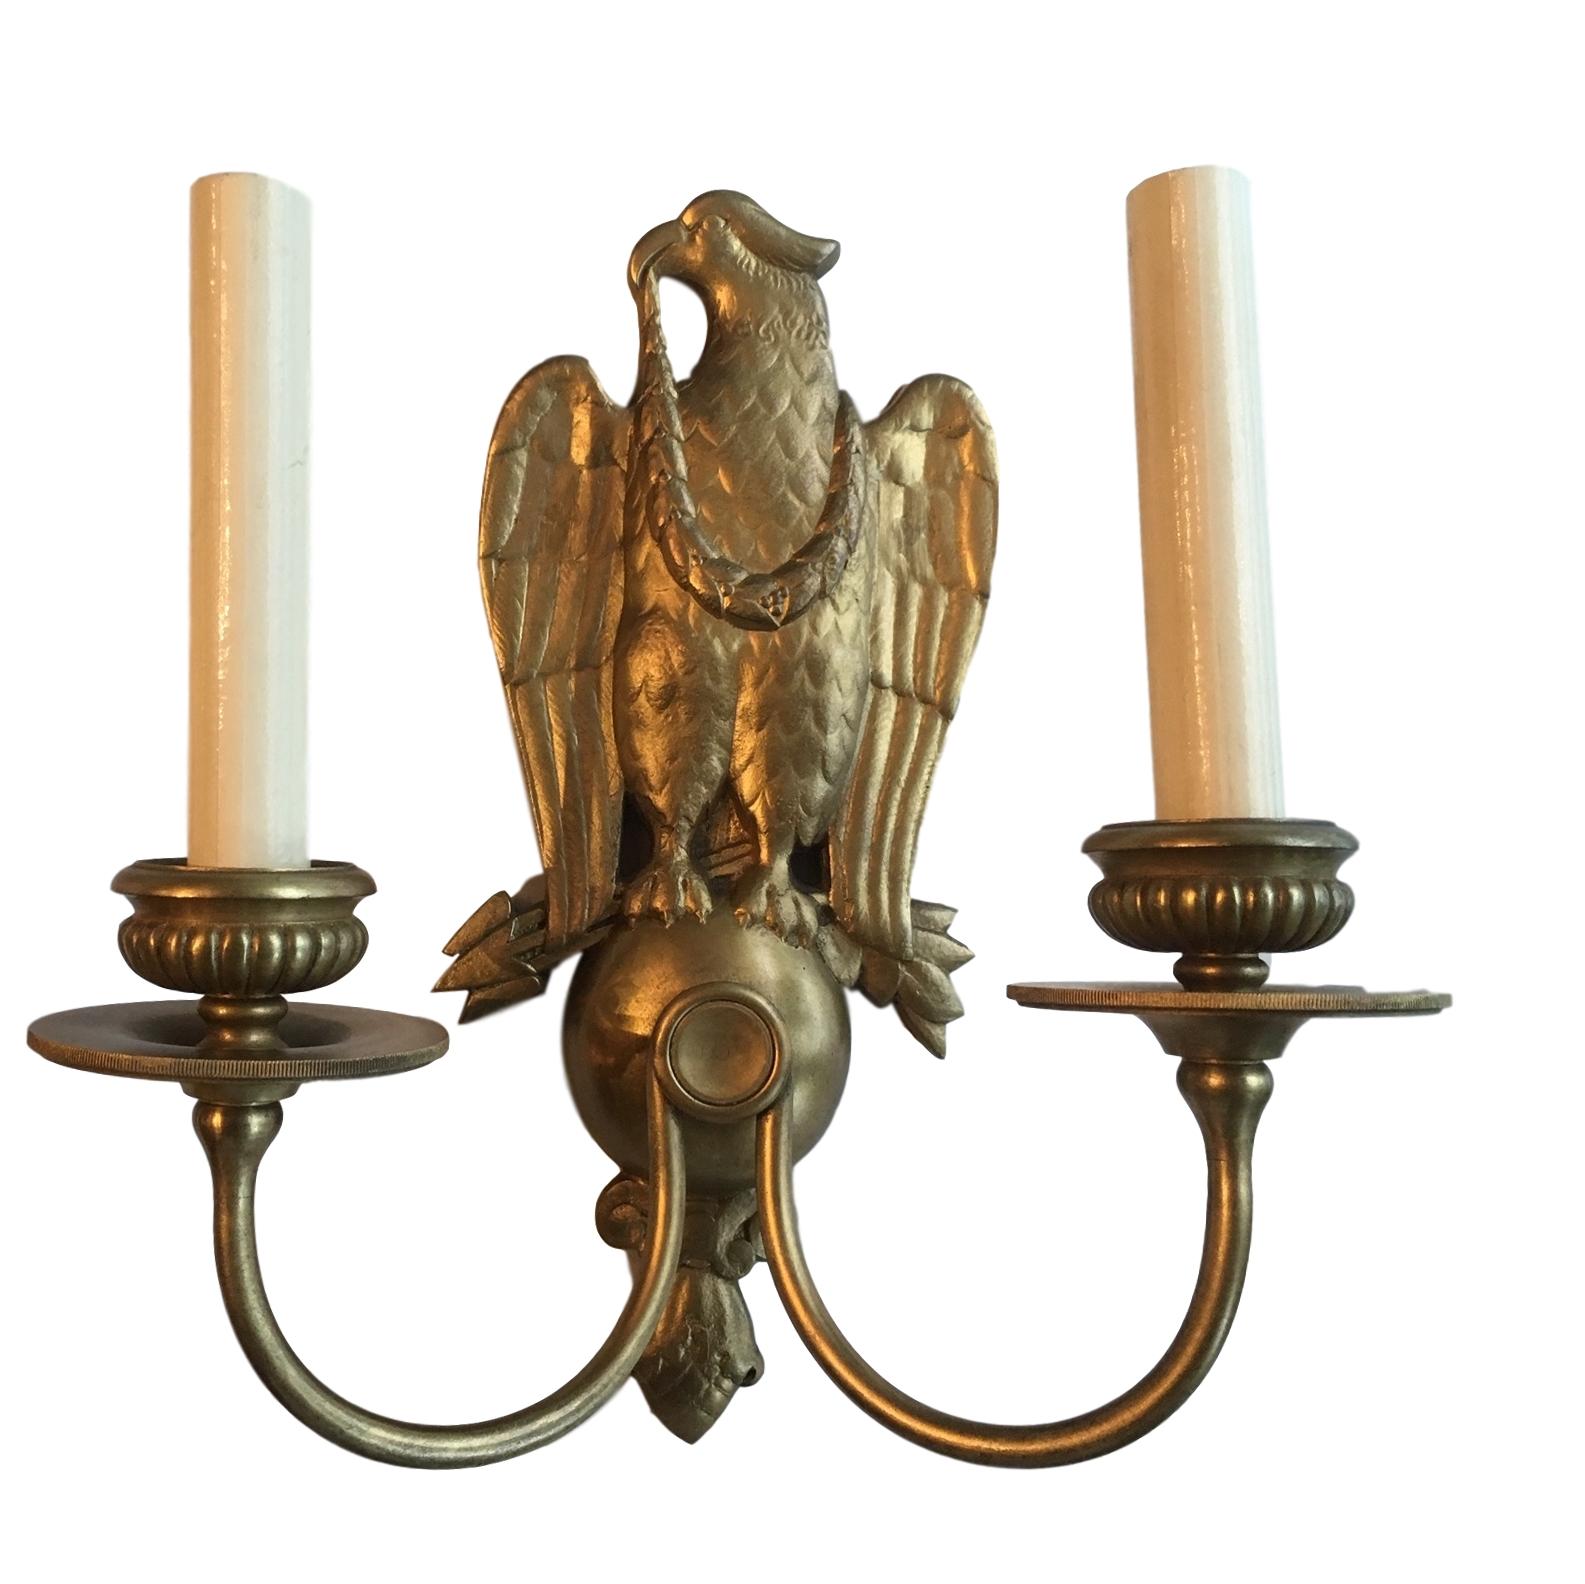 Caldwell Sconces with Eagle Motif im Zustand „Gut“ in New York, NY